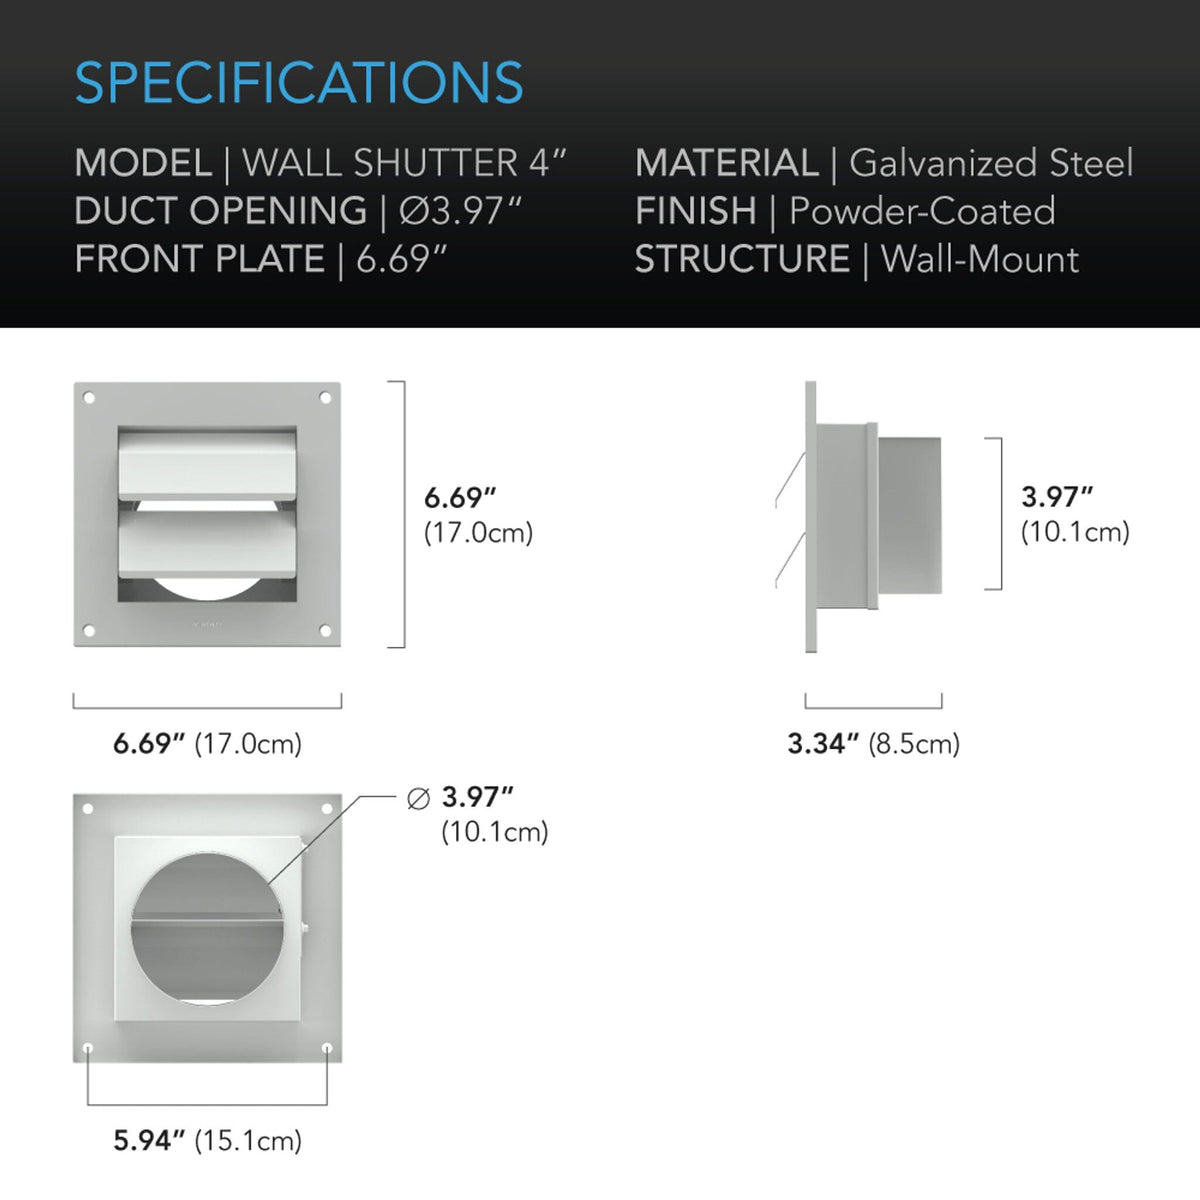 Wall Shutter 4 inch Specifications